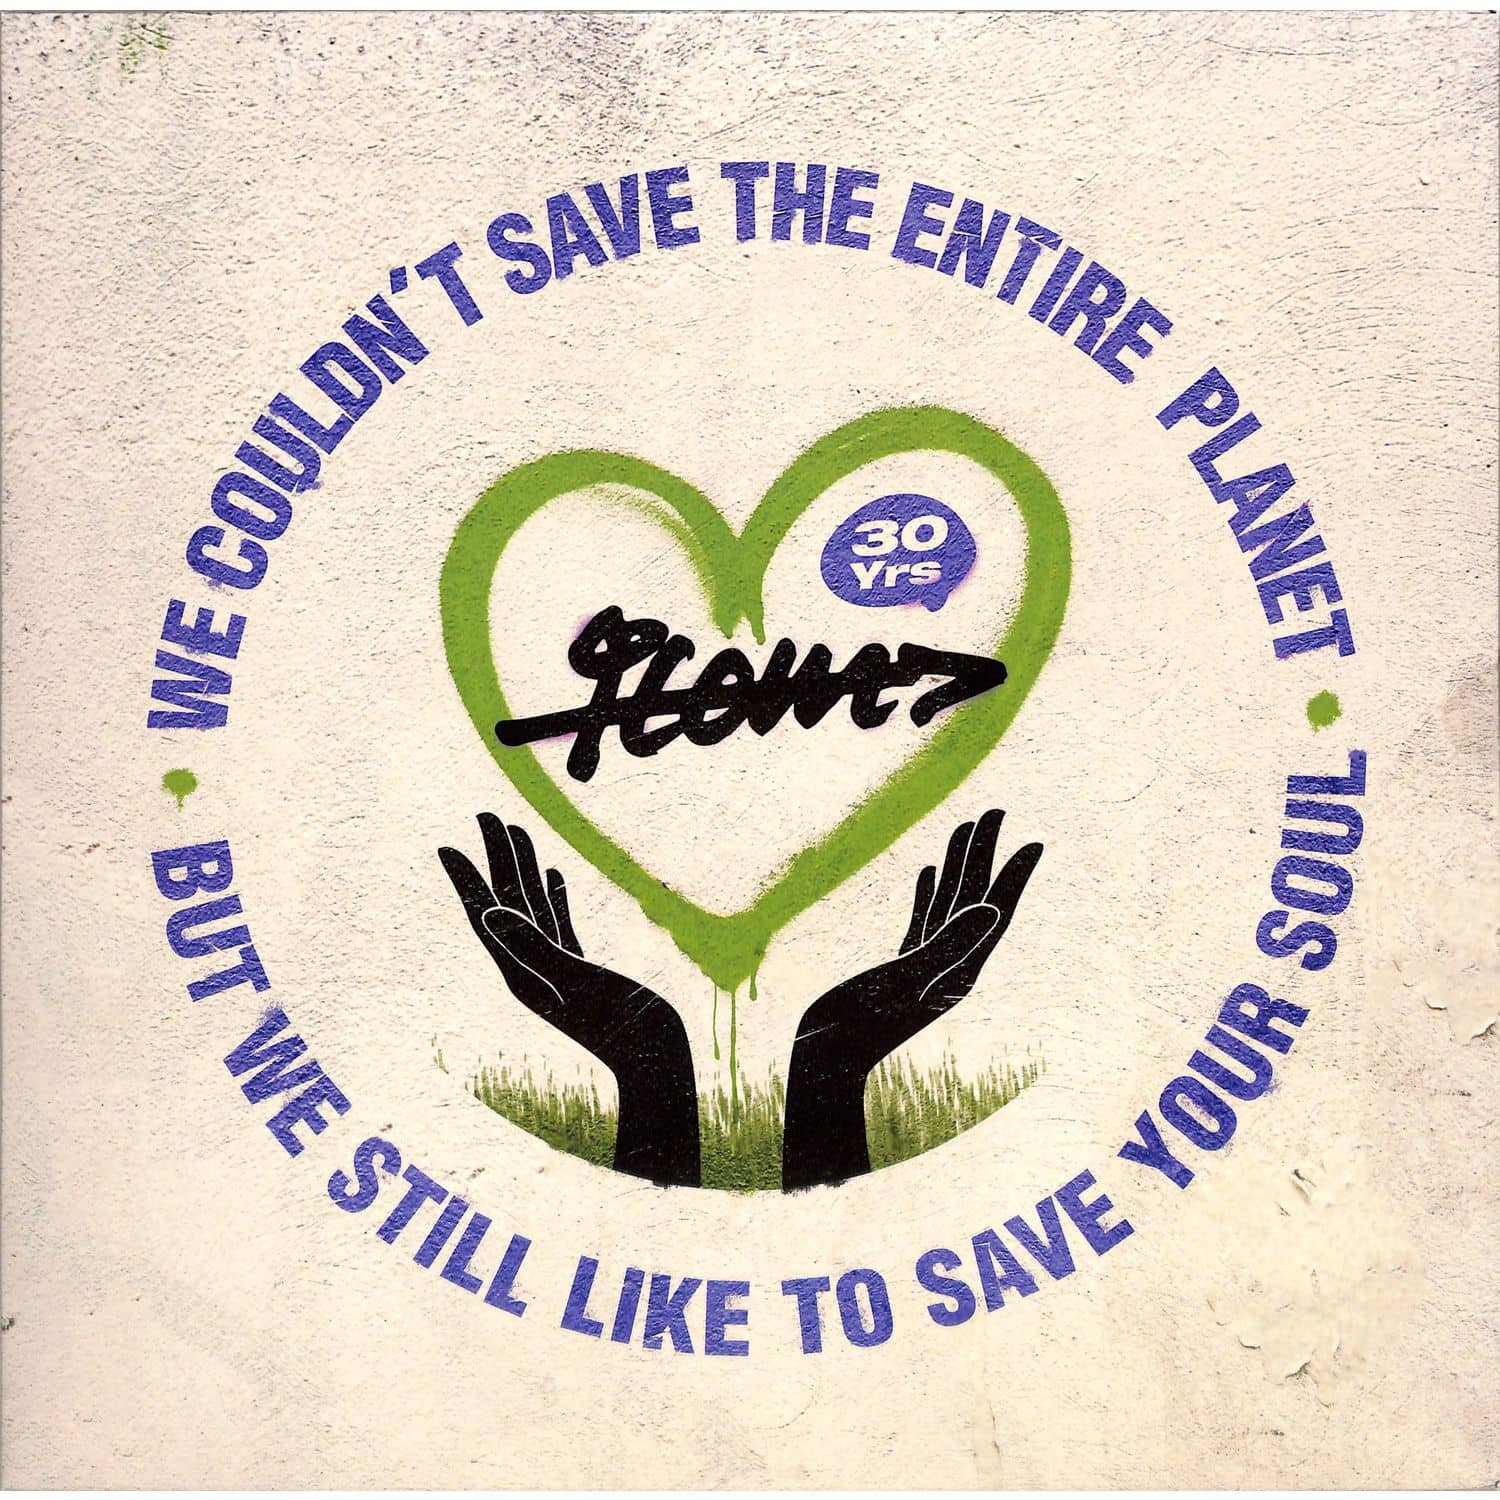 Various Artists - 30 YEARS - WE COULDNT SAVE THE ENTIRE PLANET, BUT WE STILL LIKE TO SAVE YOUR SOUL 